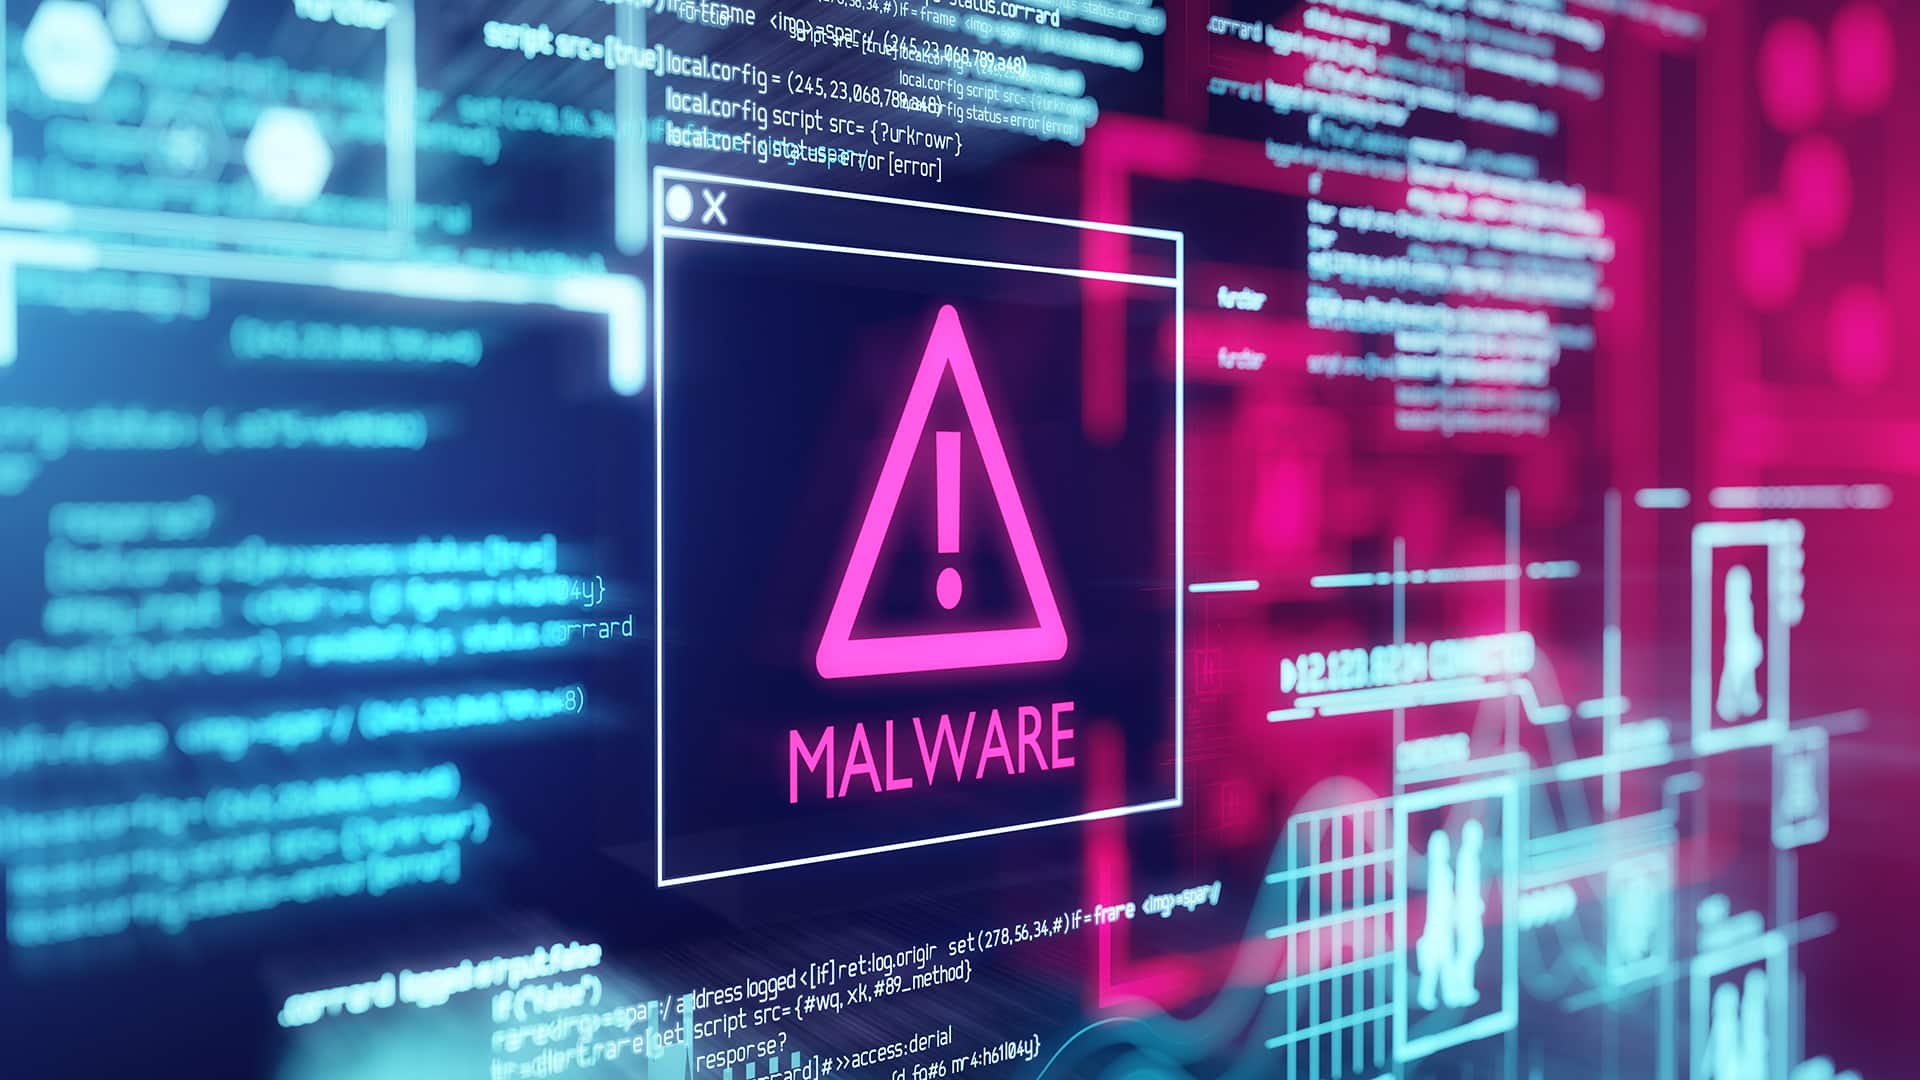 Protecting Against Computer Viruses and Malware